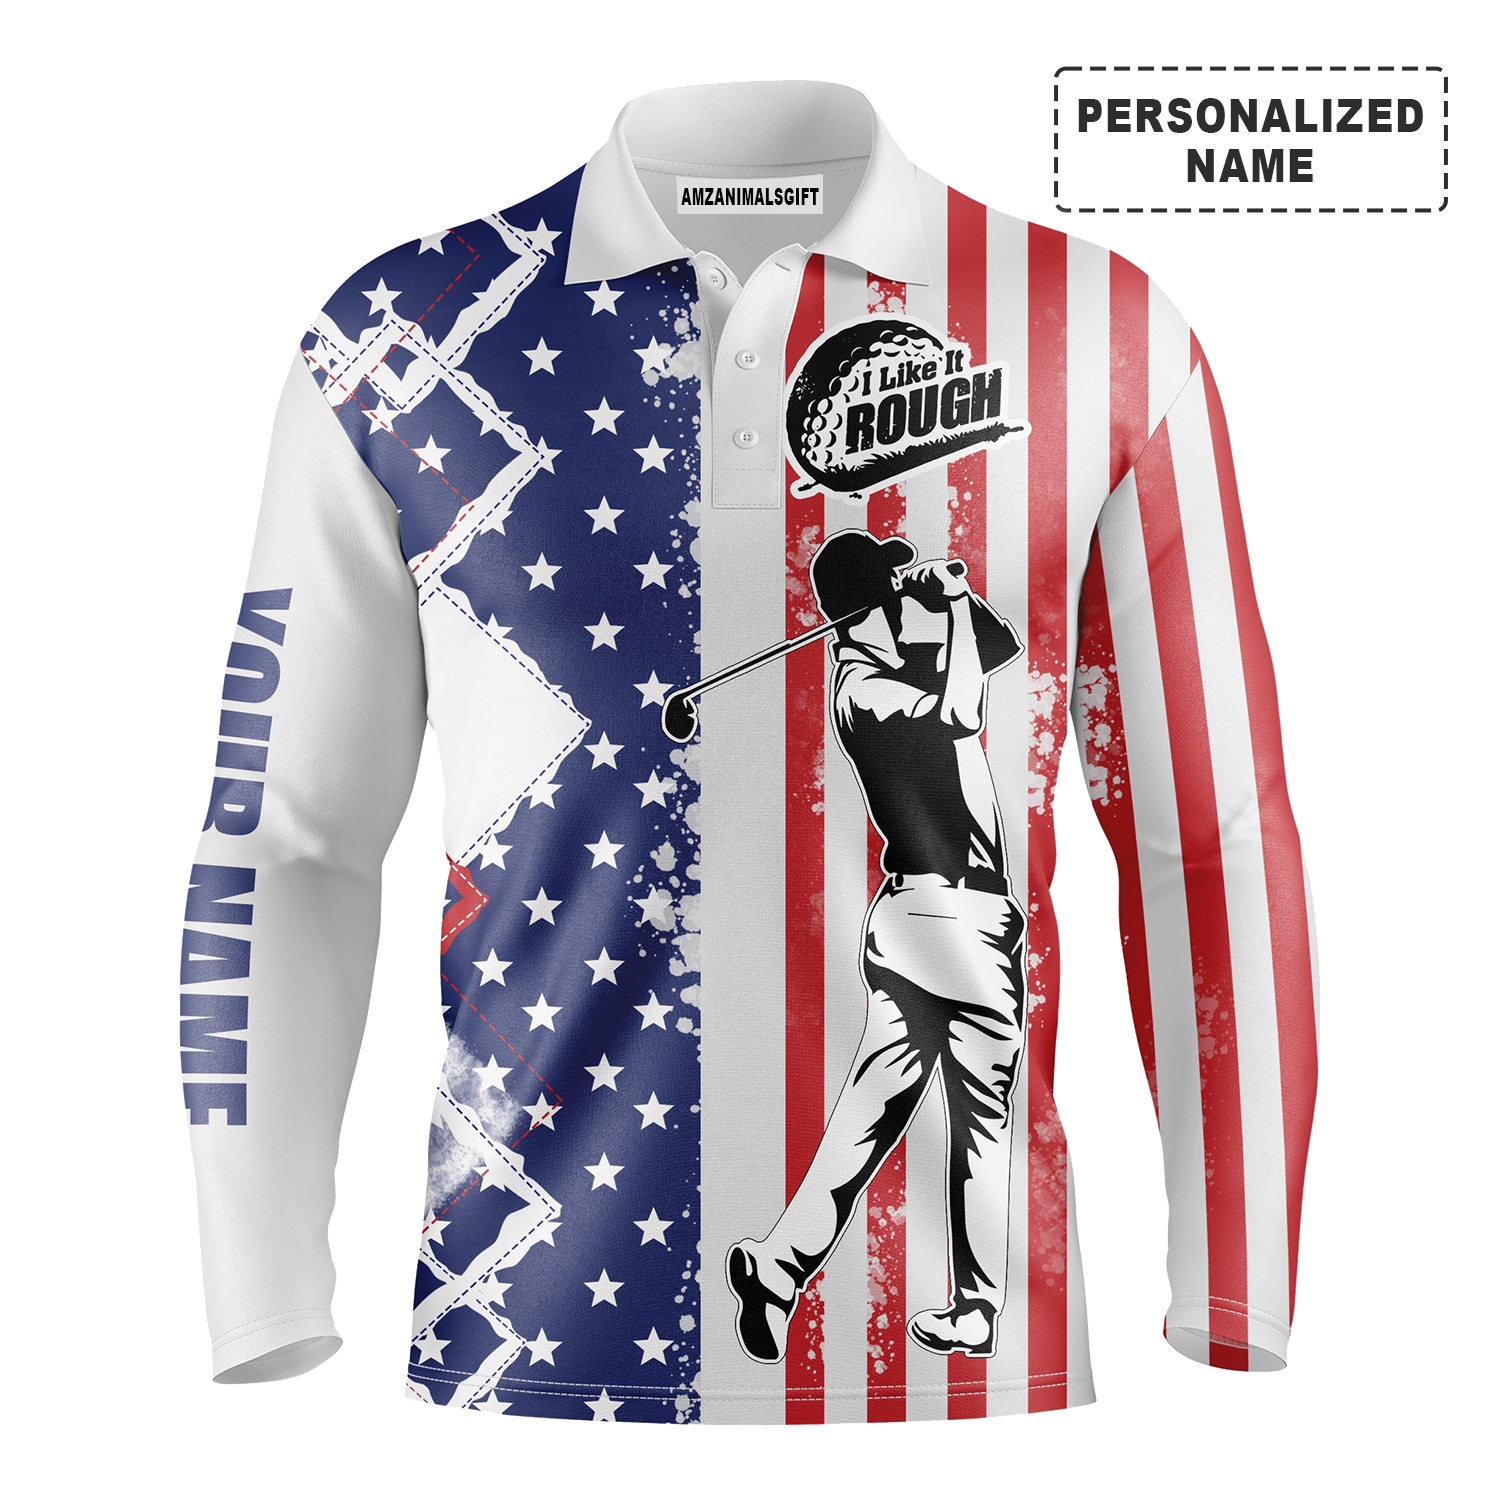 Personalized Name Golf Long Sleeve Polo Shirt American Flag Patriotic I Like It Rough, Best Gift And Outfit For Men, Golfers, Golf Team